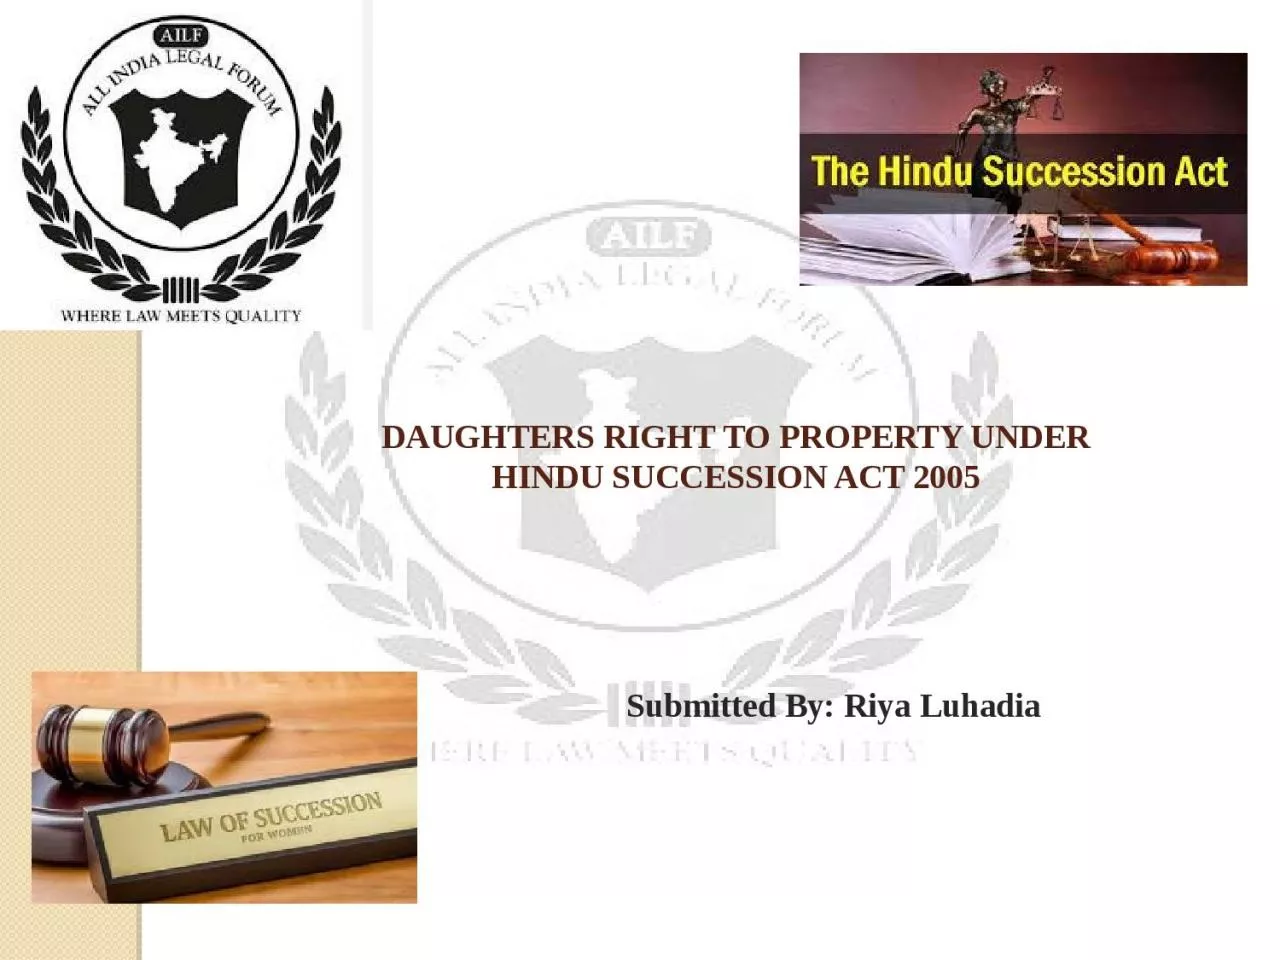 DAUGHTERS RIGHT TO PROPERTY UNDER HINDU SUCCESSION ACT 2005